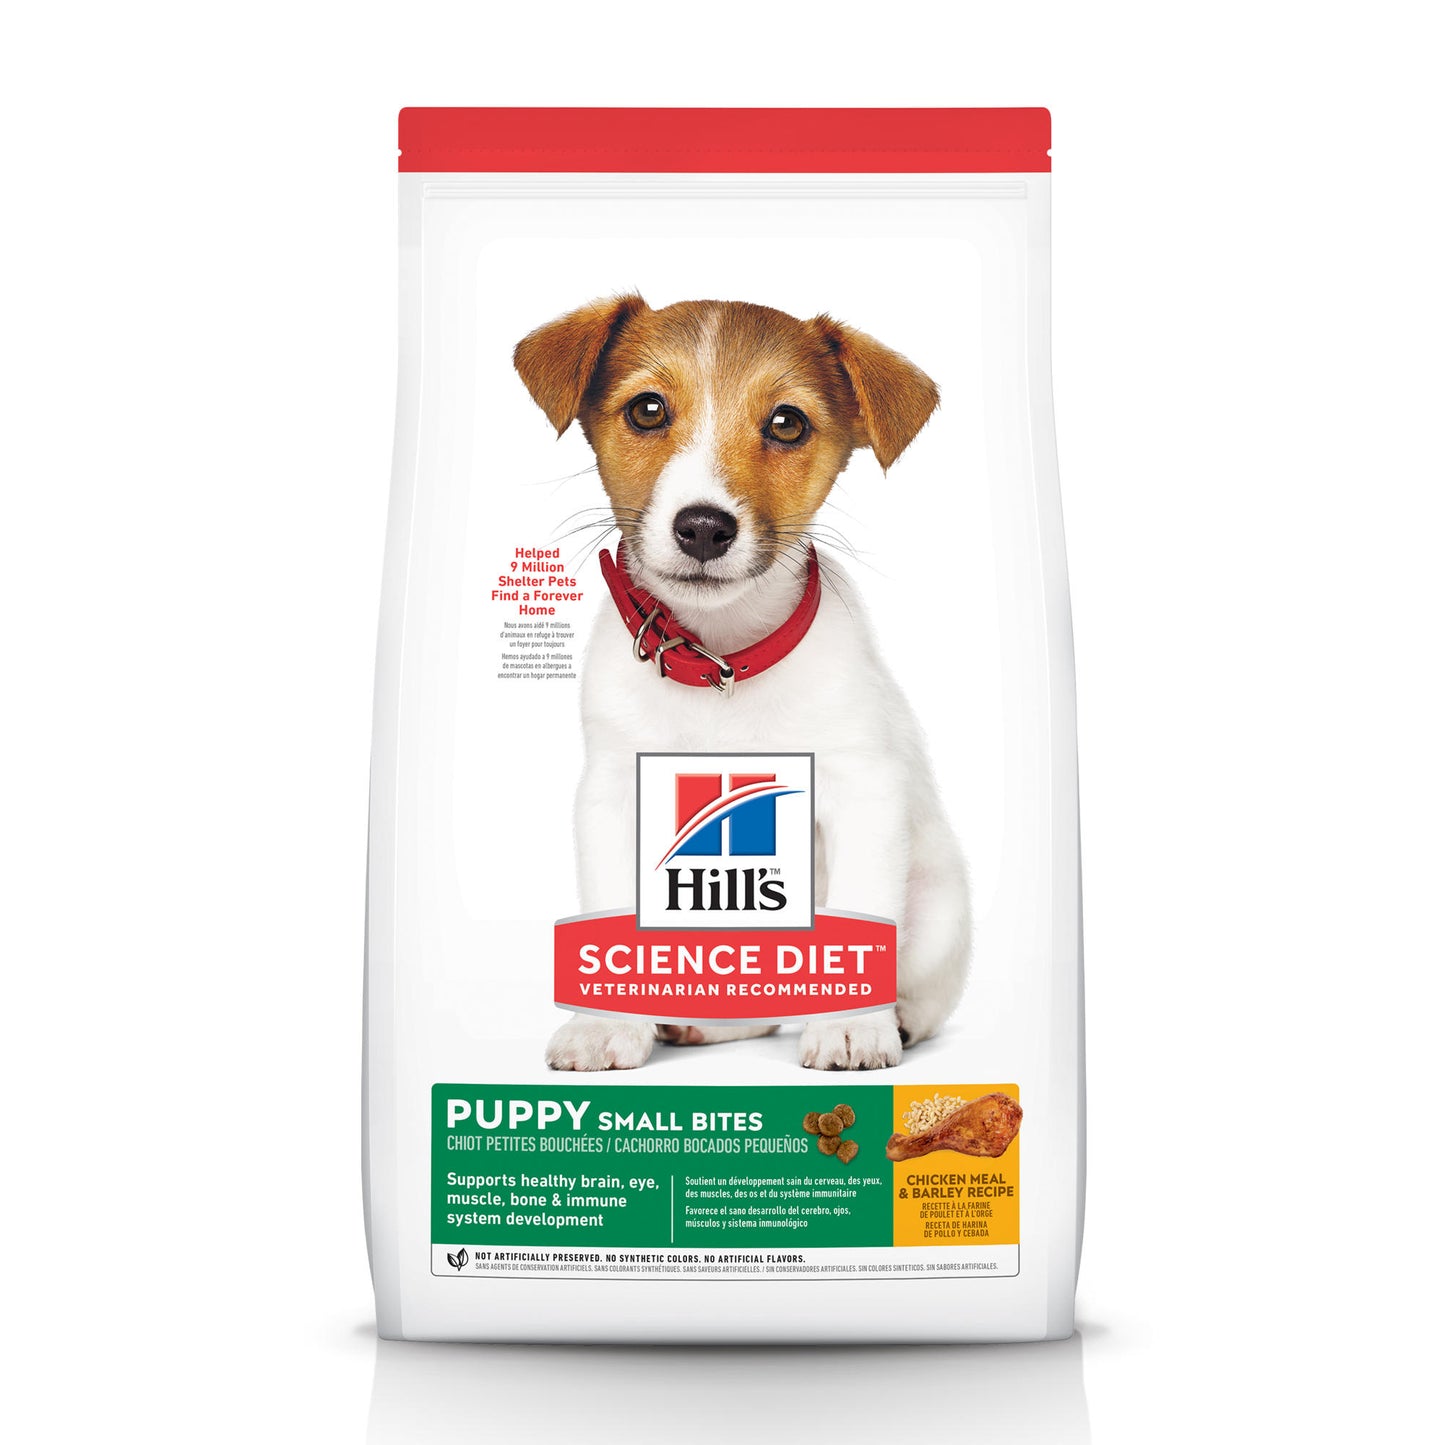 Hill's Science Diet Puppy Small Bites Chicken Meal & Barley Recipe Dry Dog Food, 4.5 lb bag